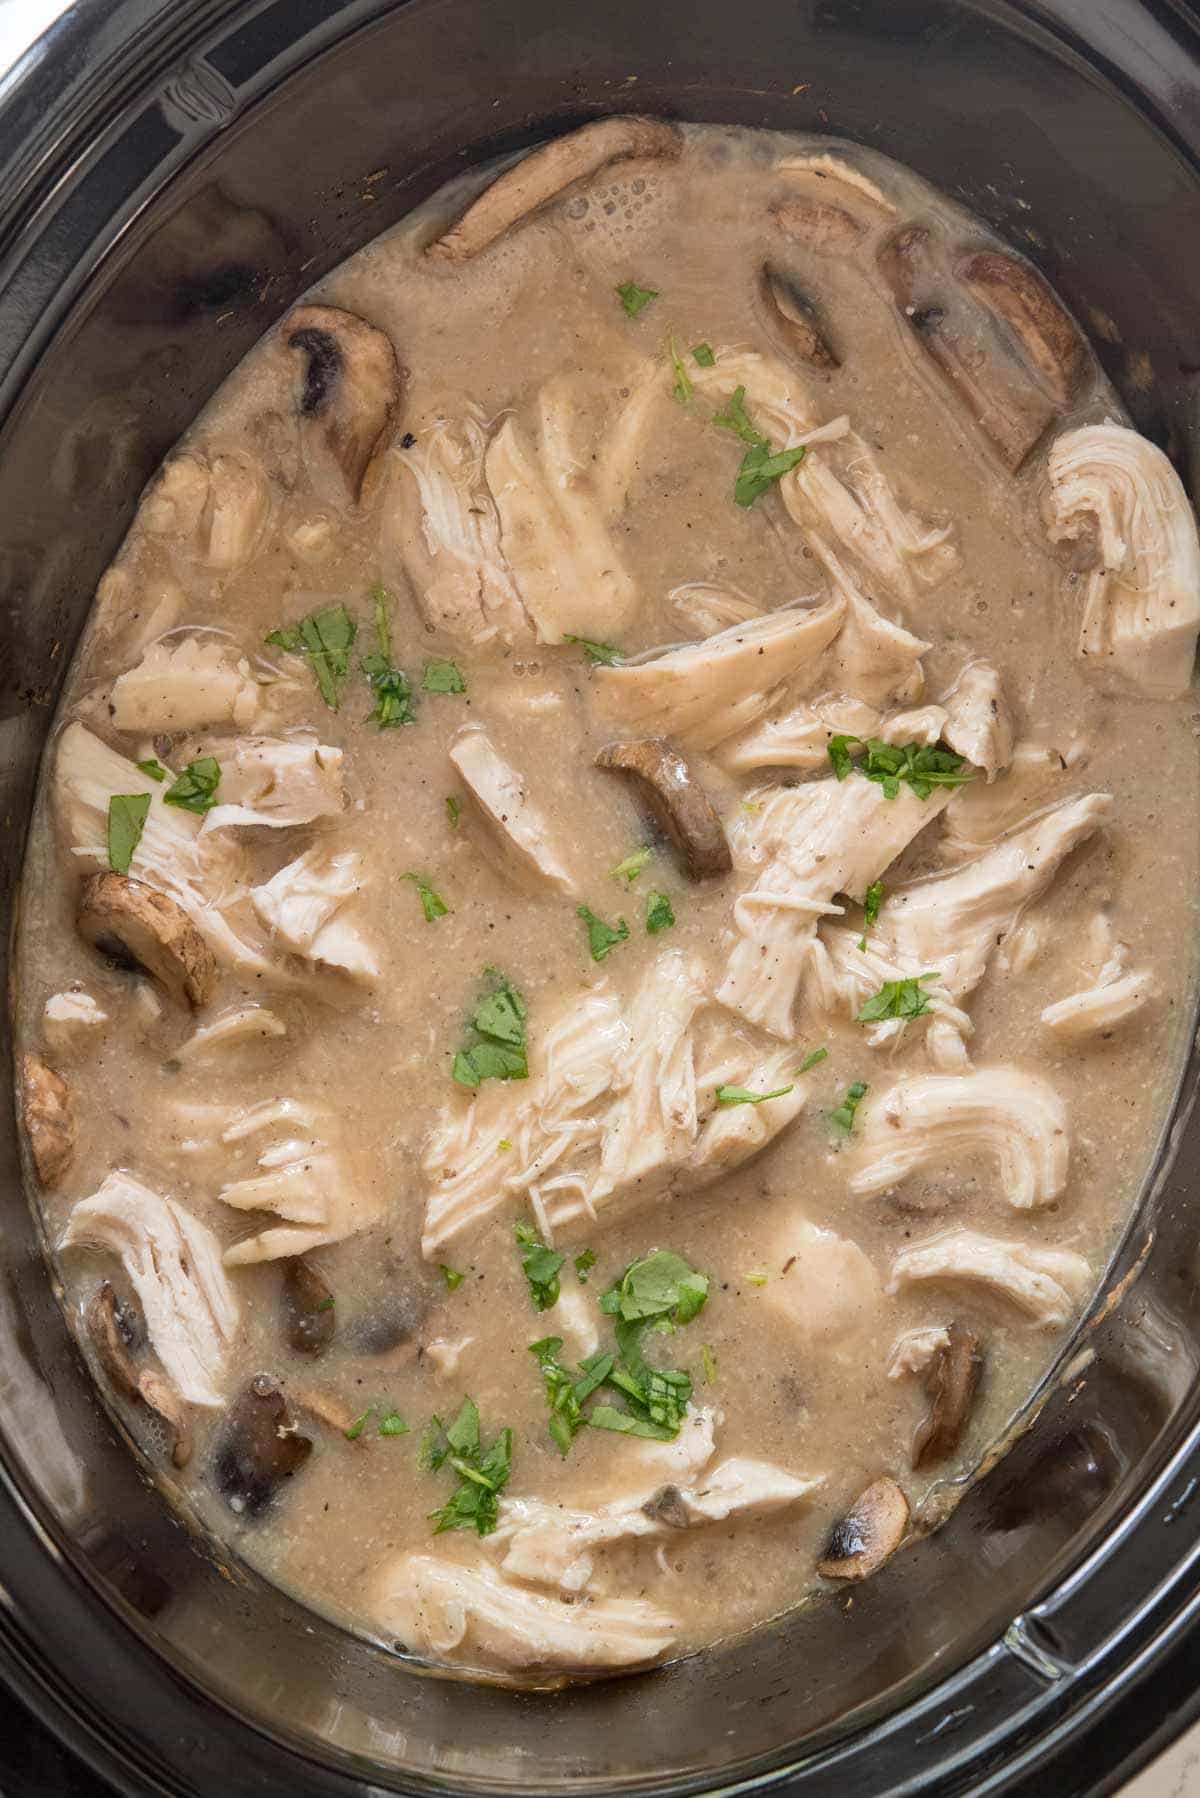 Crockpot Mushroom Chicken - this easy slow cooker chicken recipe is a quick and delicious way to get dinner on the table. Just dump a few ingredients into the crockpot and forget it until dinner!